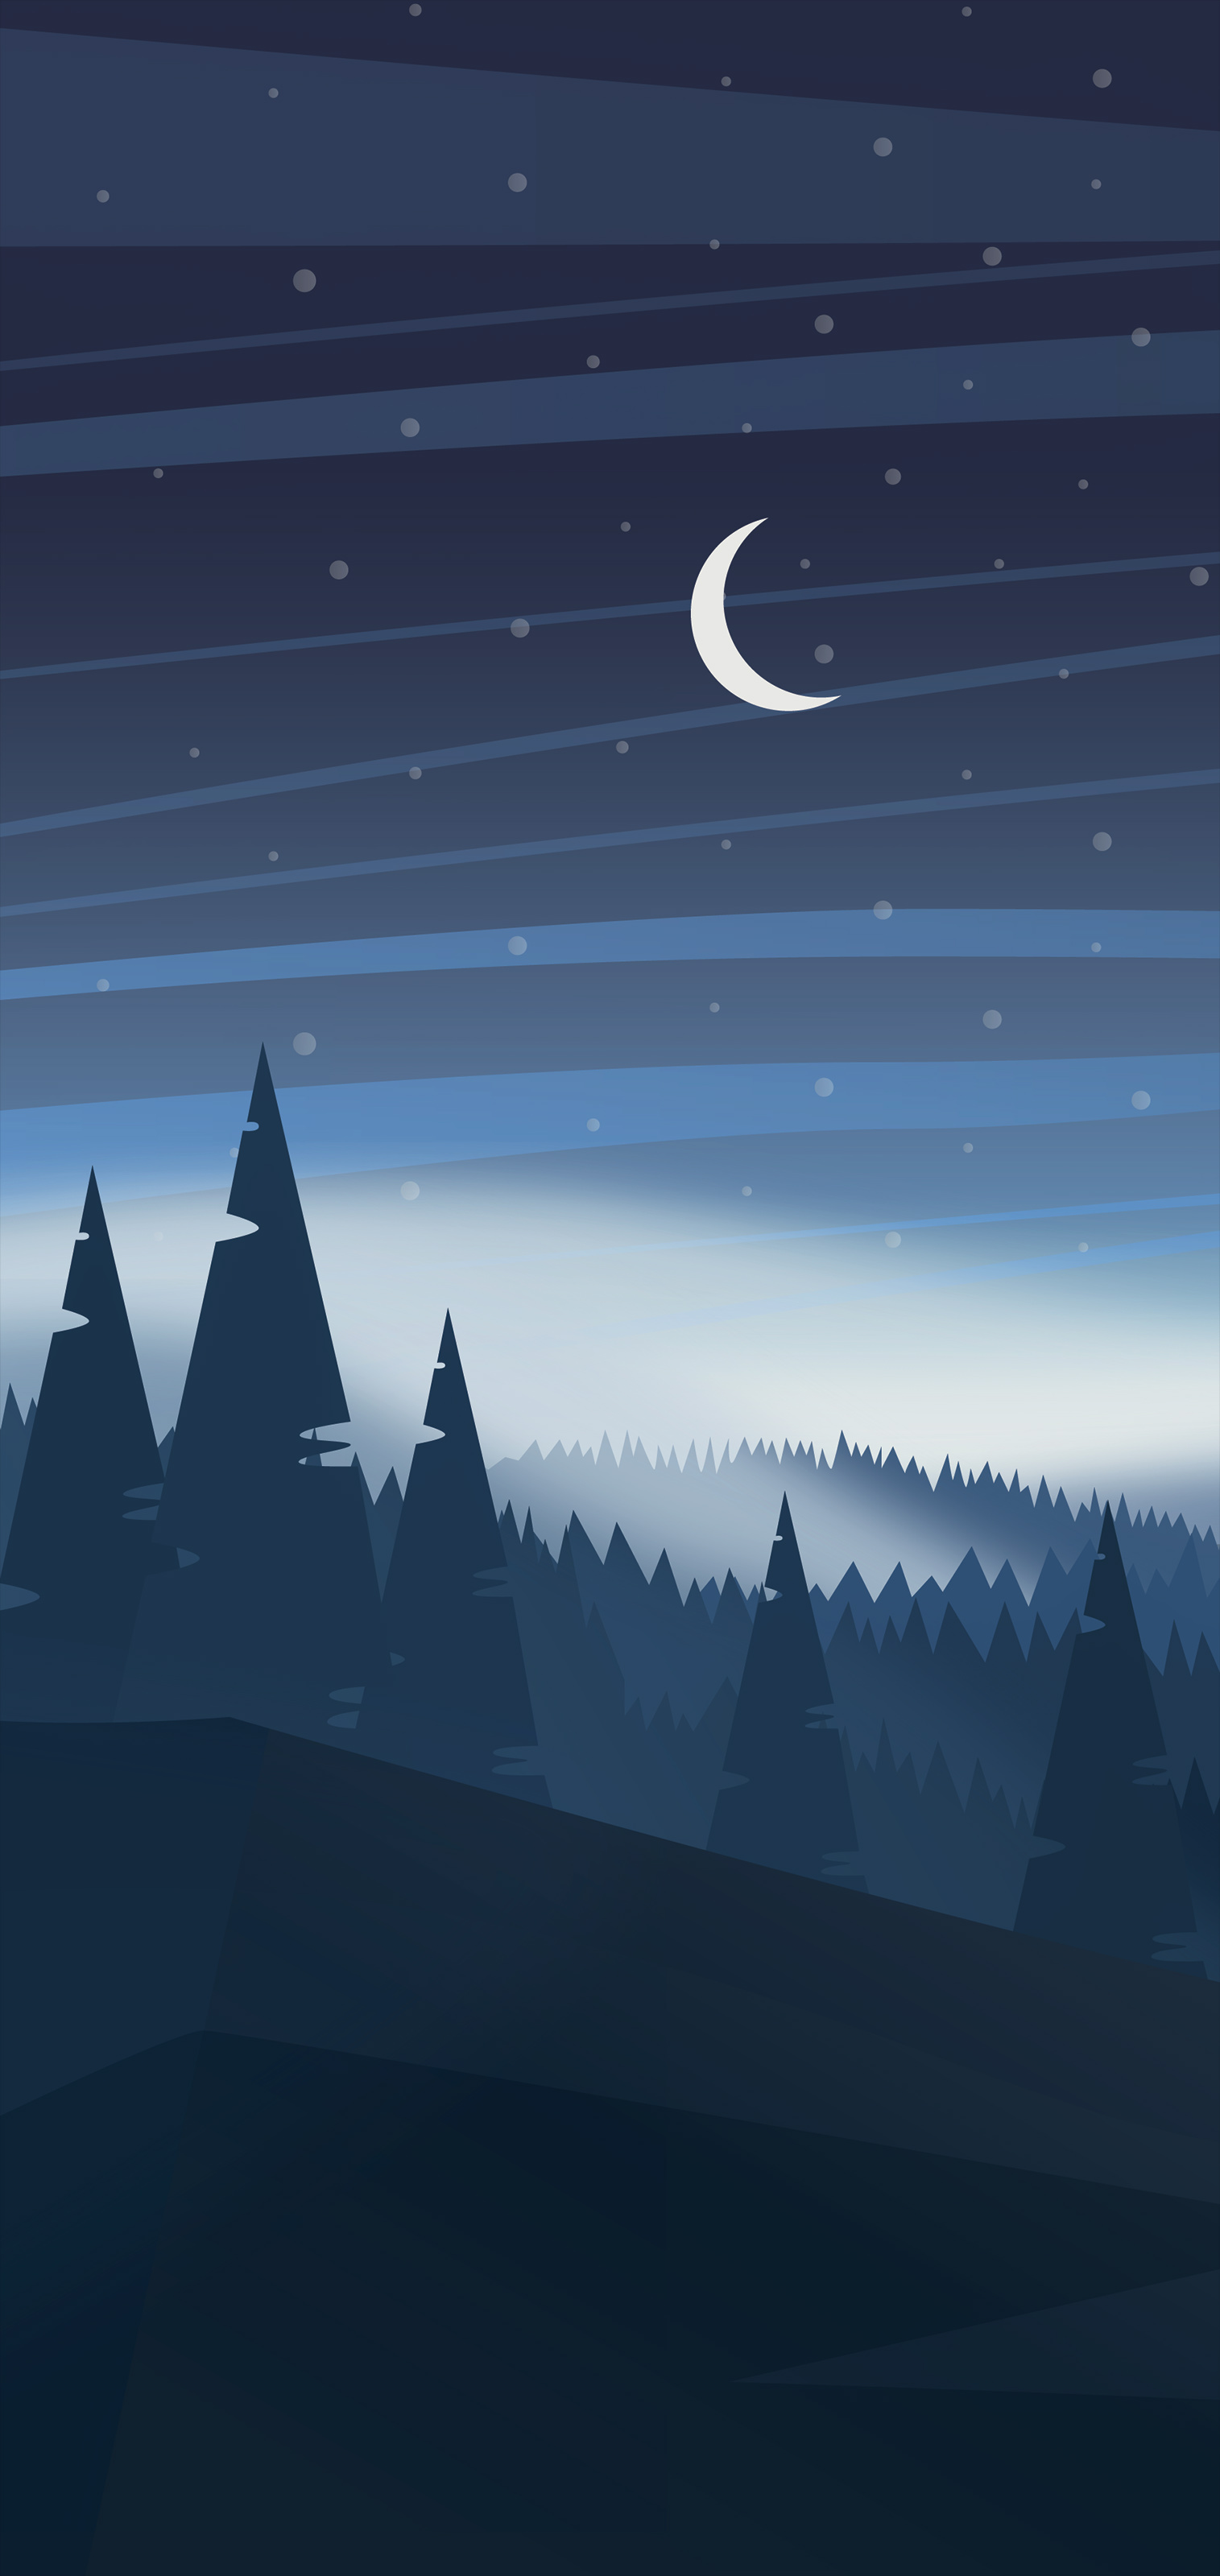 Wallpaper Illustration, Landscape Painting, Drawing, Painting, Night, Background Free Image